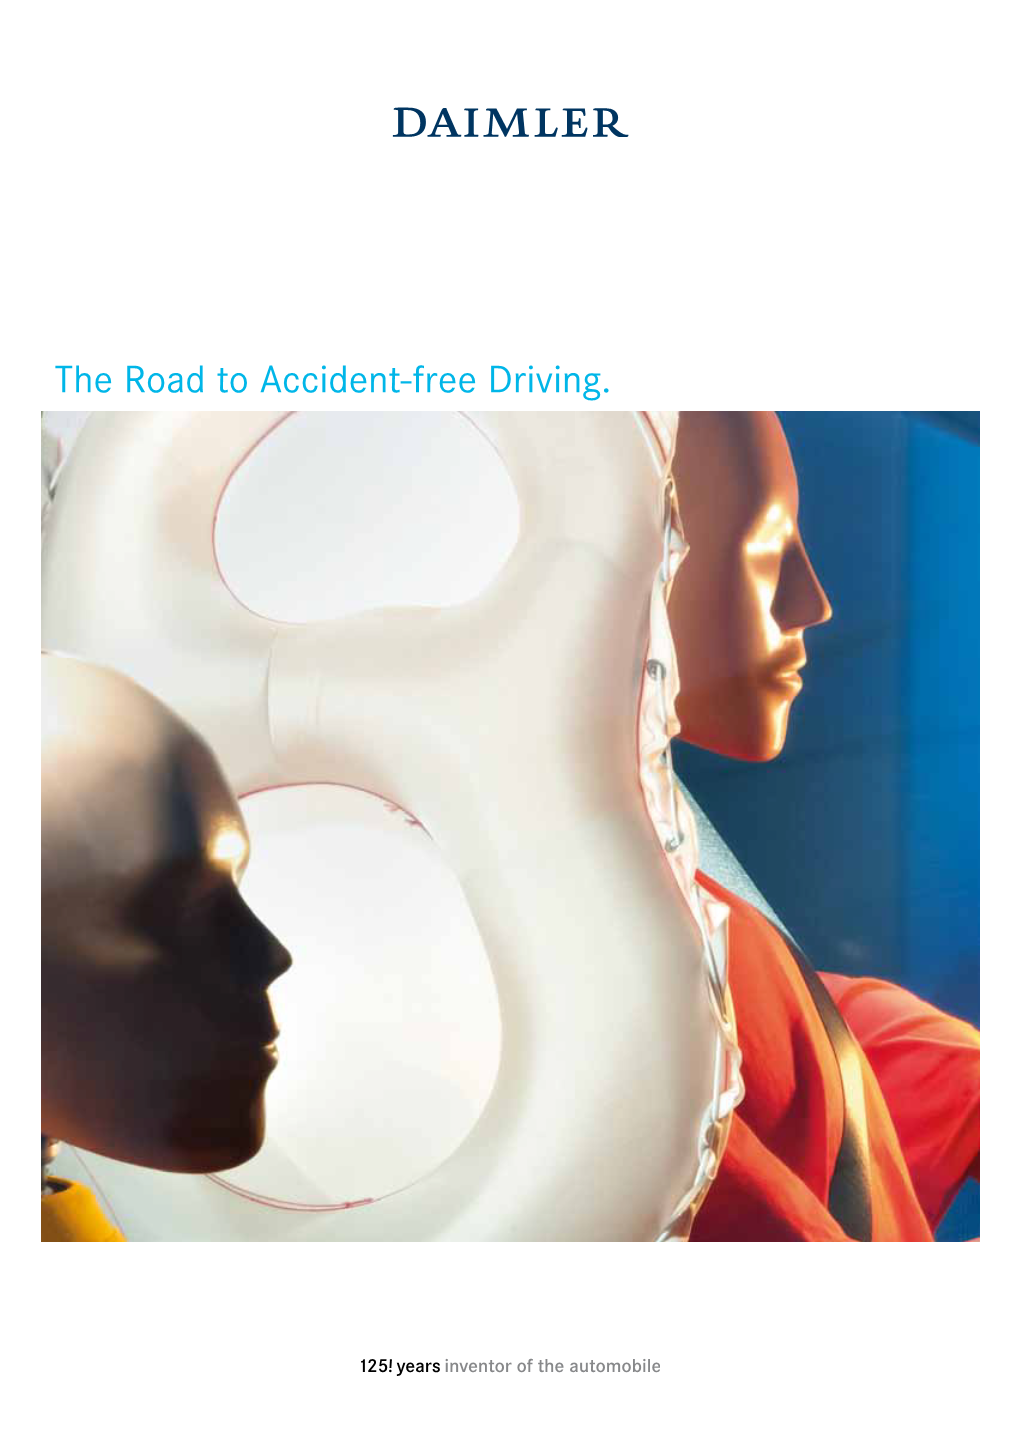 The Road to Accident-Free Driving. We Invented the Car and the Truck and Are Passionate About Their Future